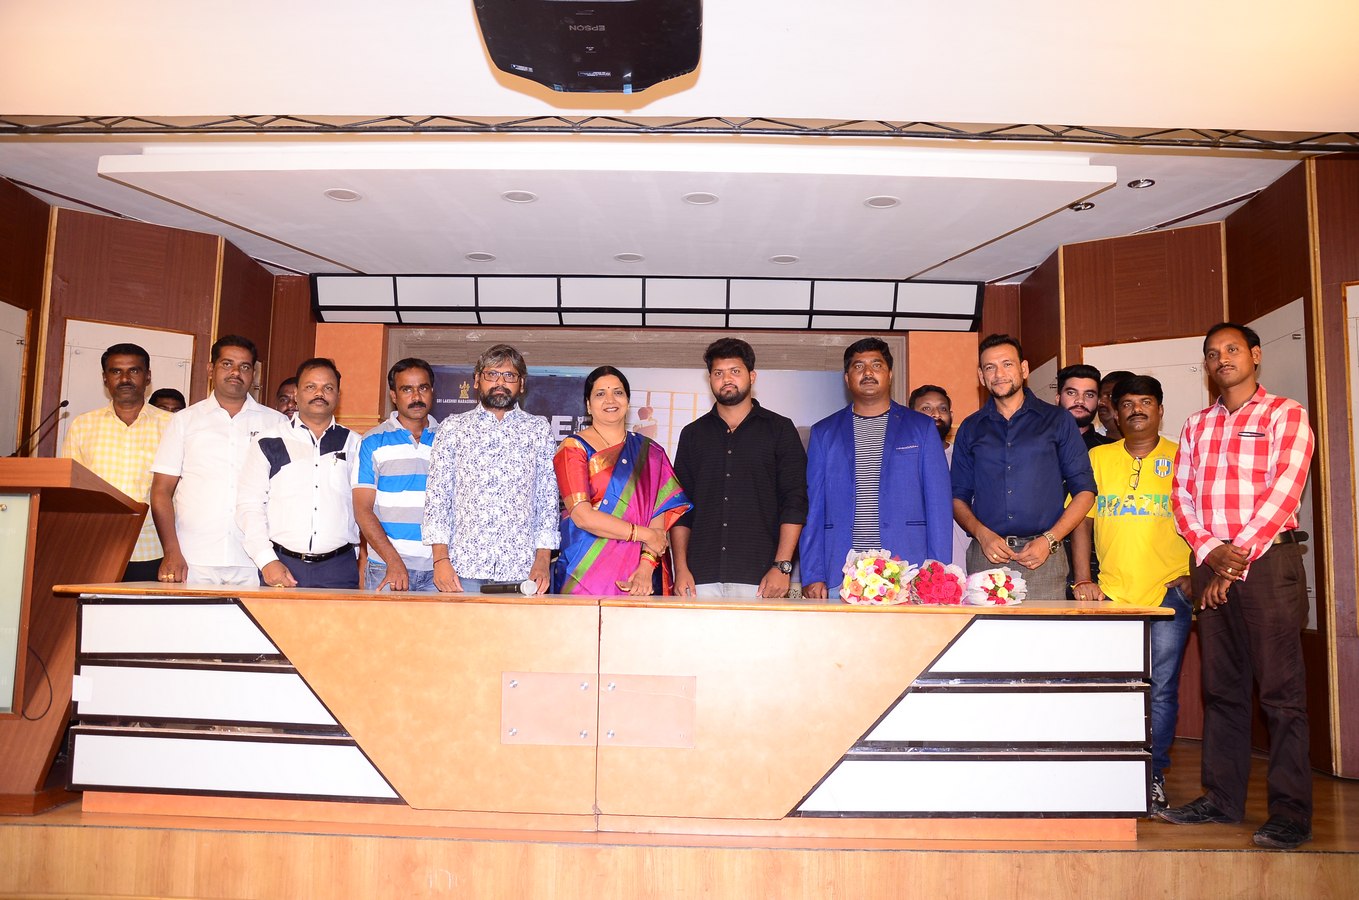 Degree Collage Movie Trailer Launch Photos